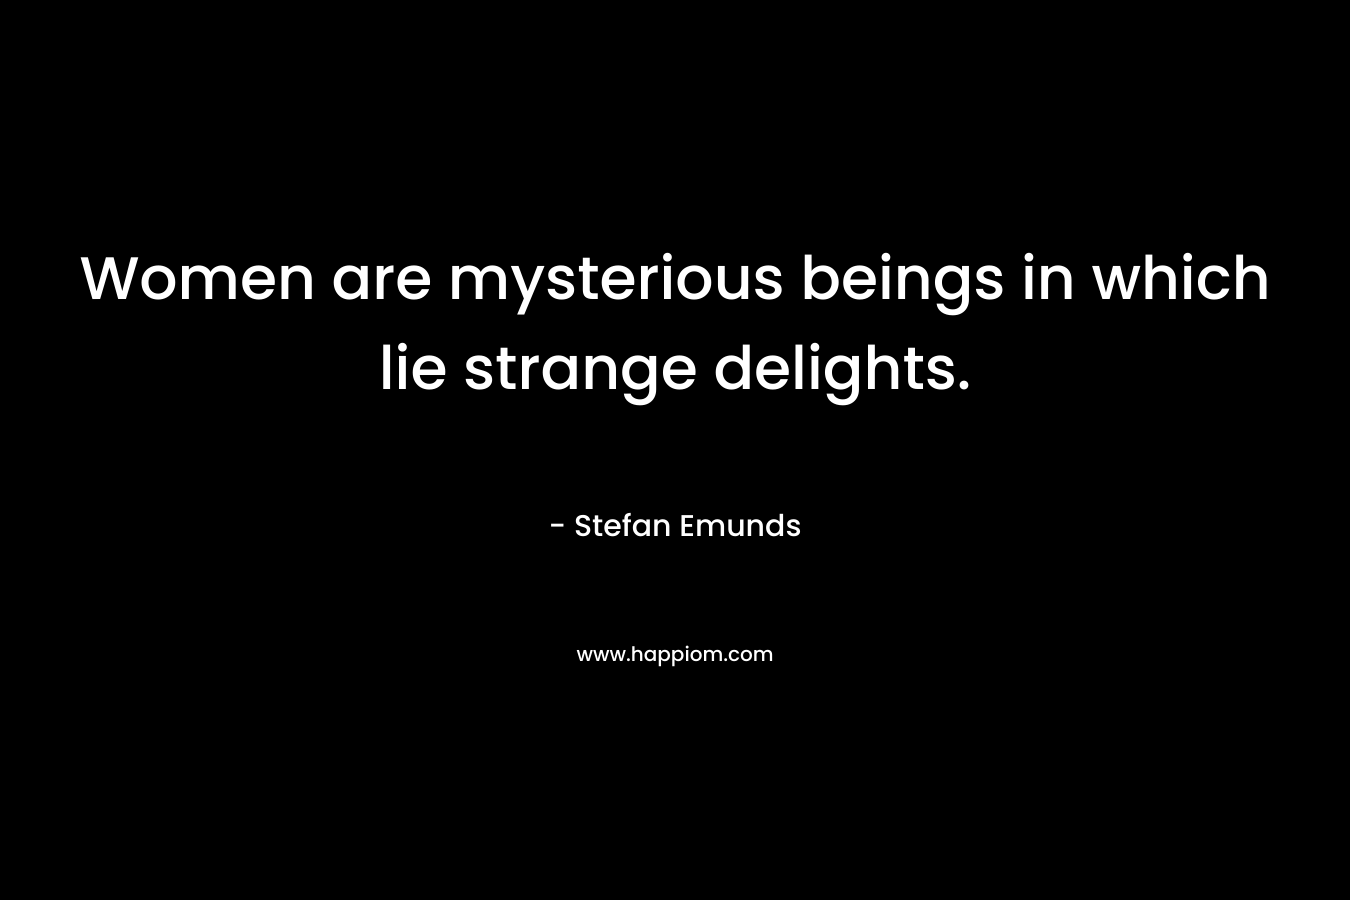 Women are mysterious beings in which lie strange delights.